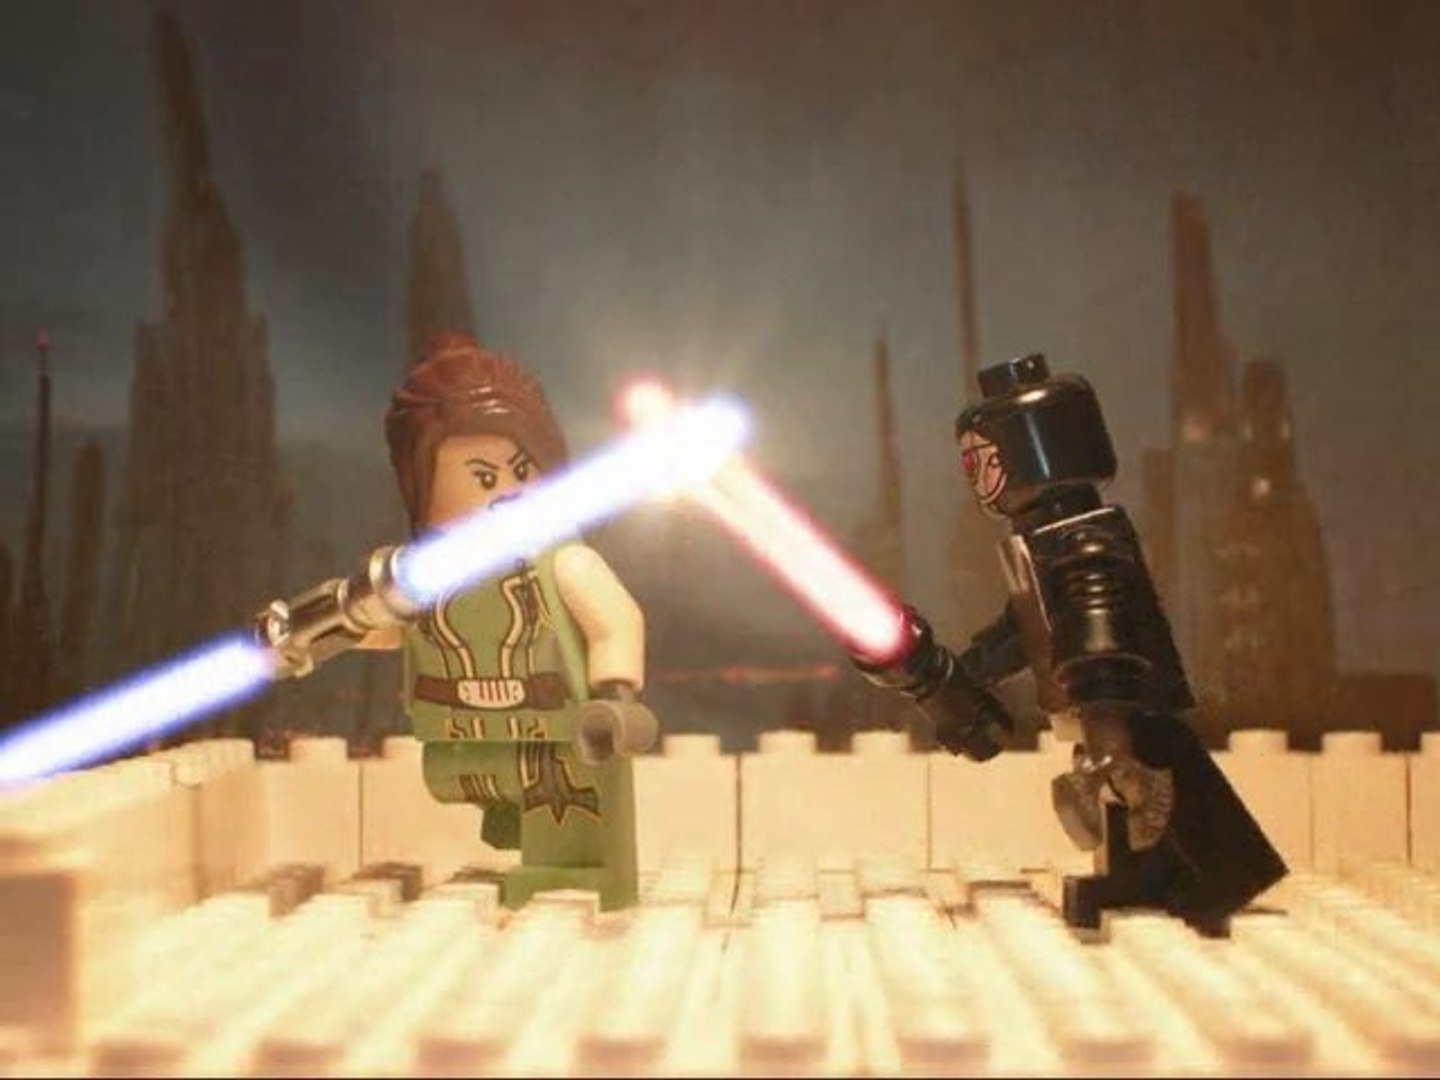 Lego Star Wars The Old Republic lightsabers duel - Vidéo Dailymotion